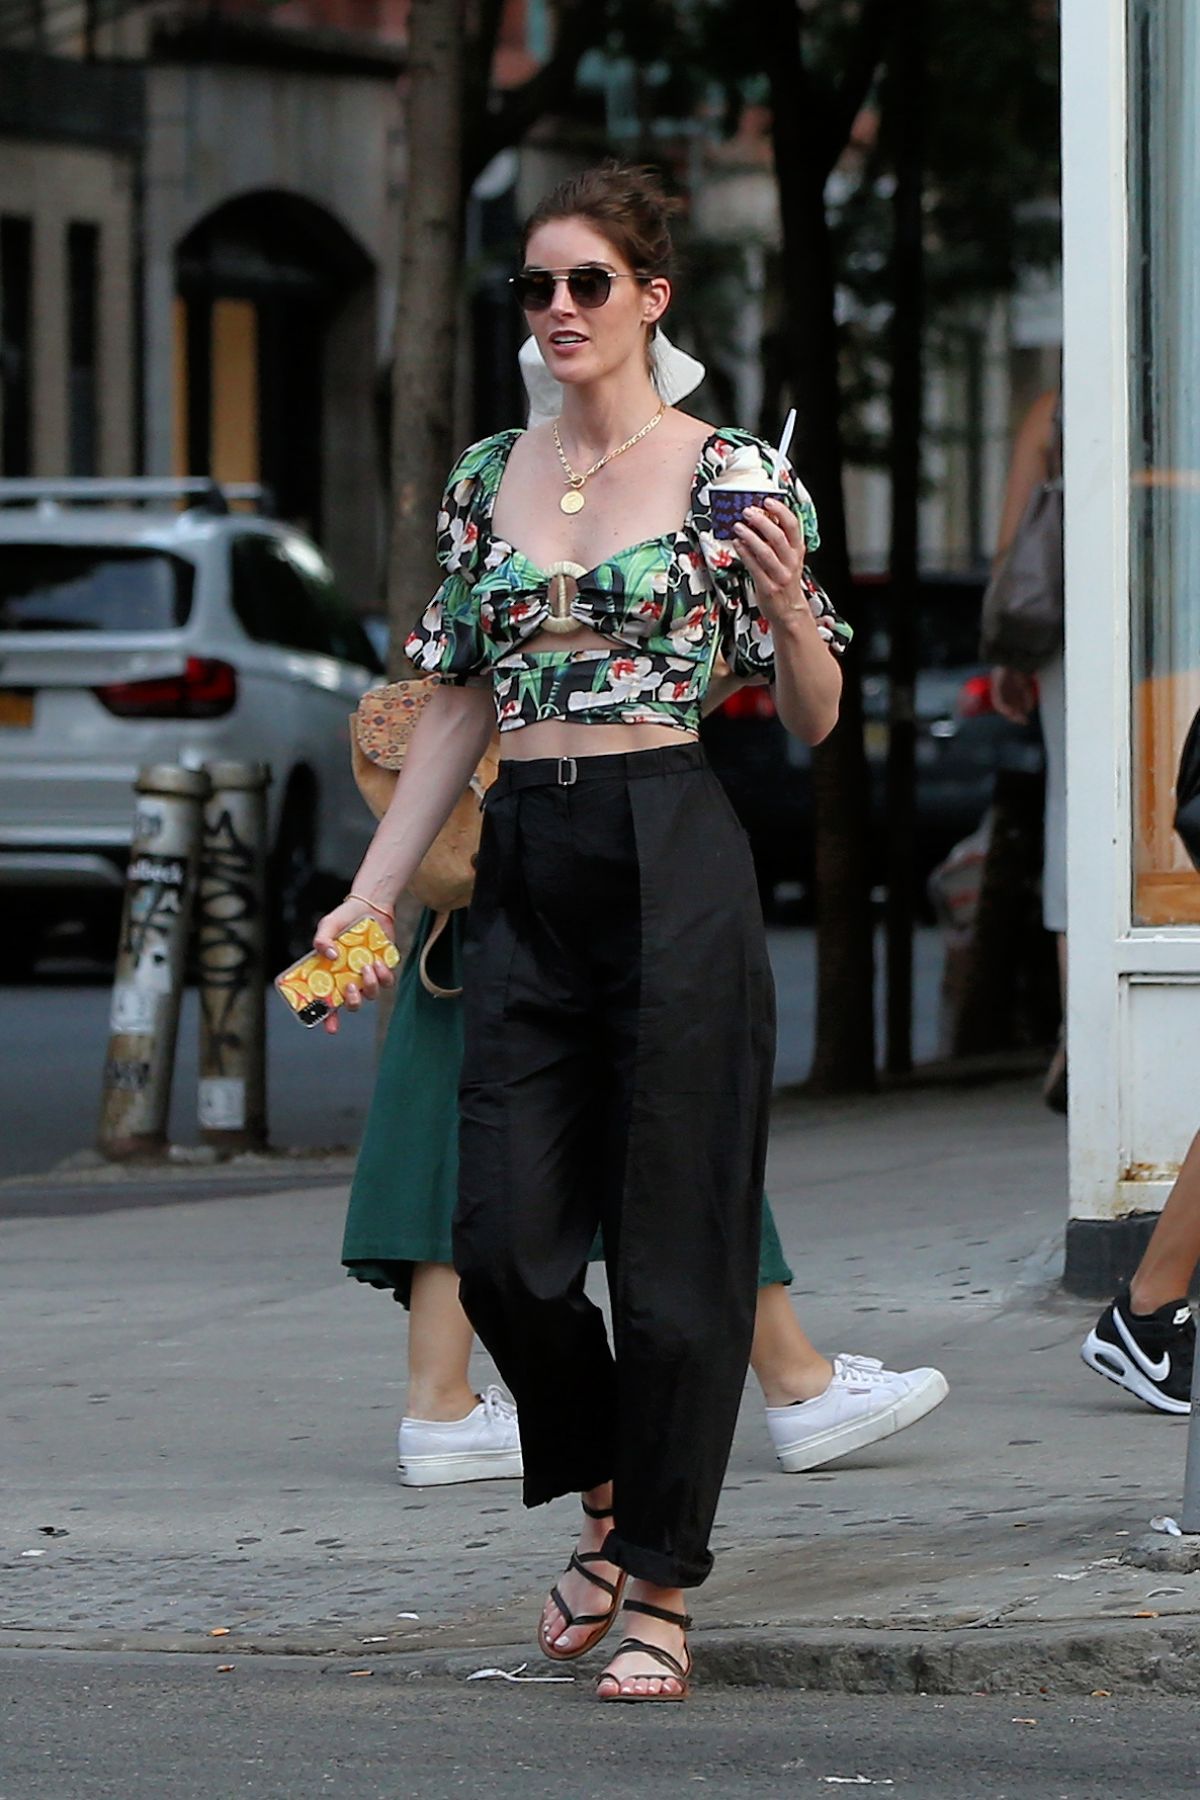 hilary-rhoda-out-and-about-n-new-york-07-16-2019-4.jpg